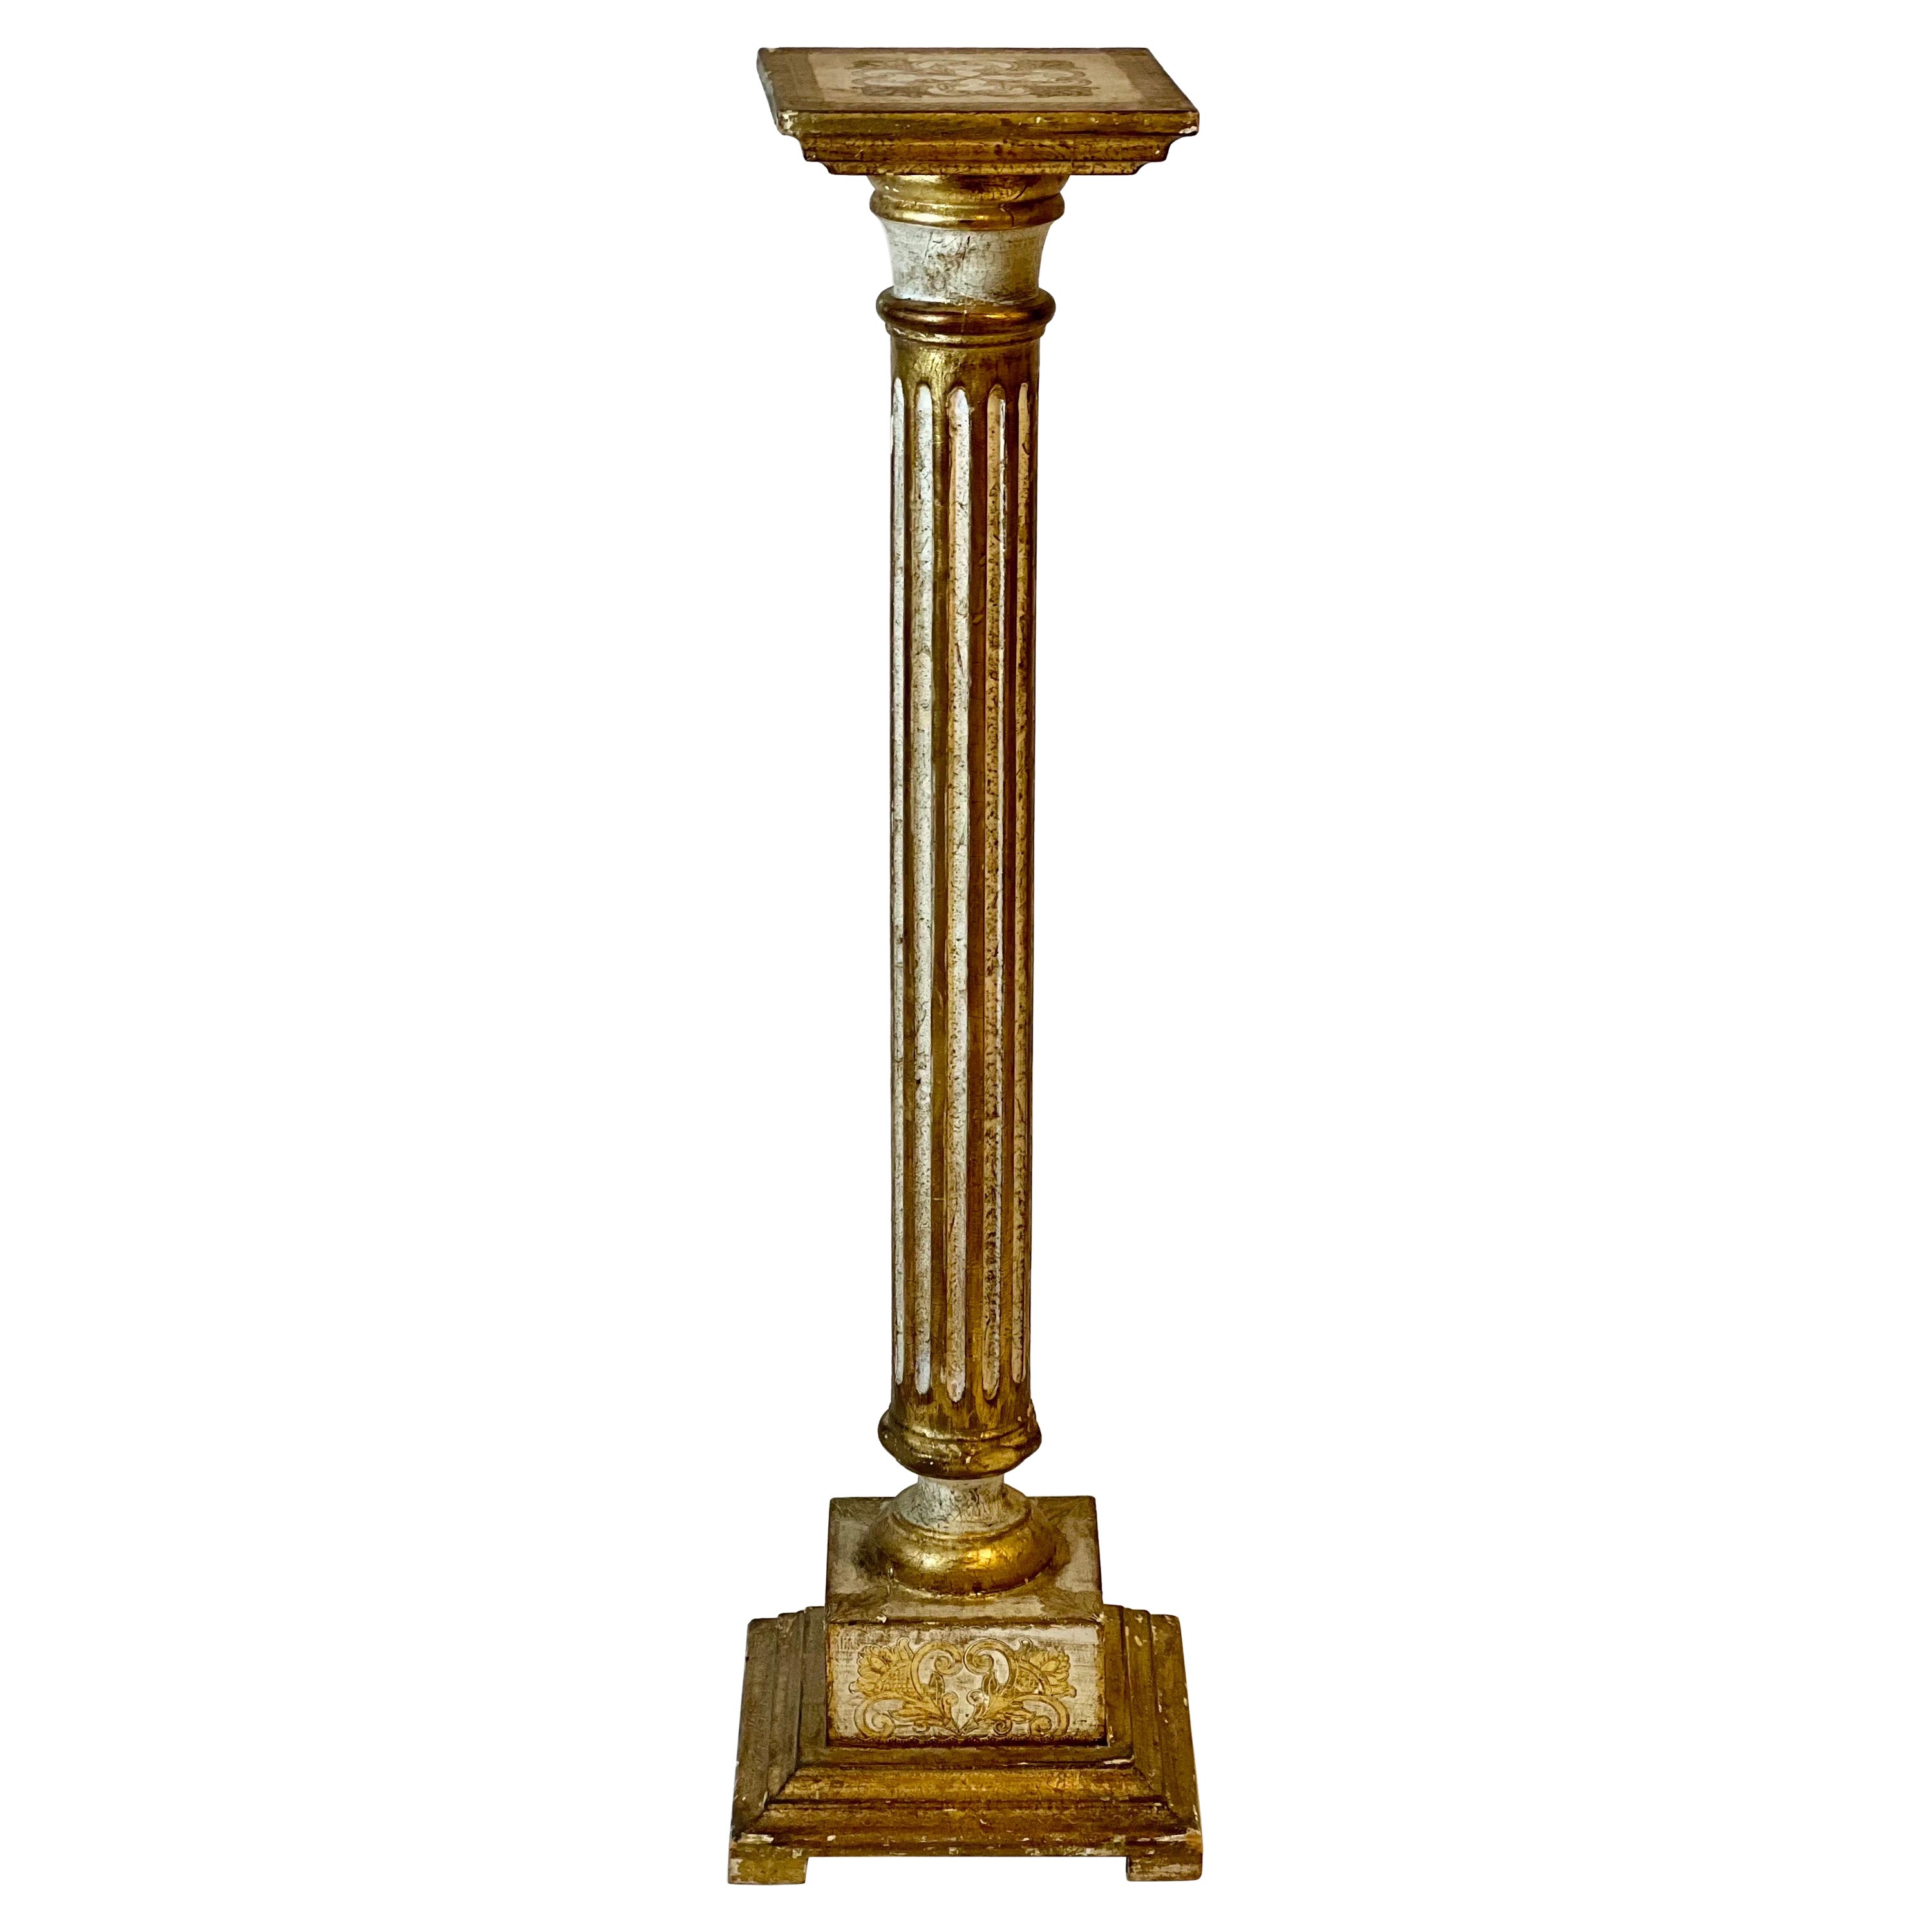 Florentine Neoclassical Fluted Cream and Gold Gilt Painted Column Pedestal